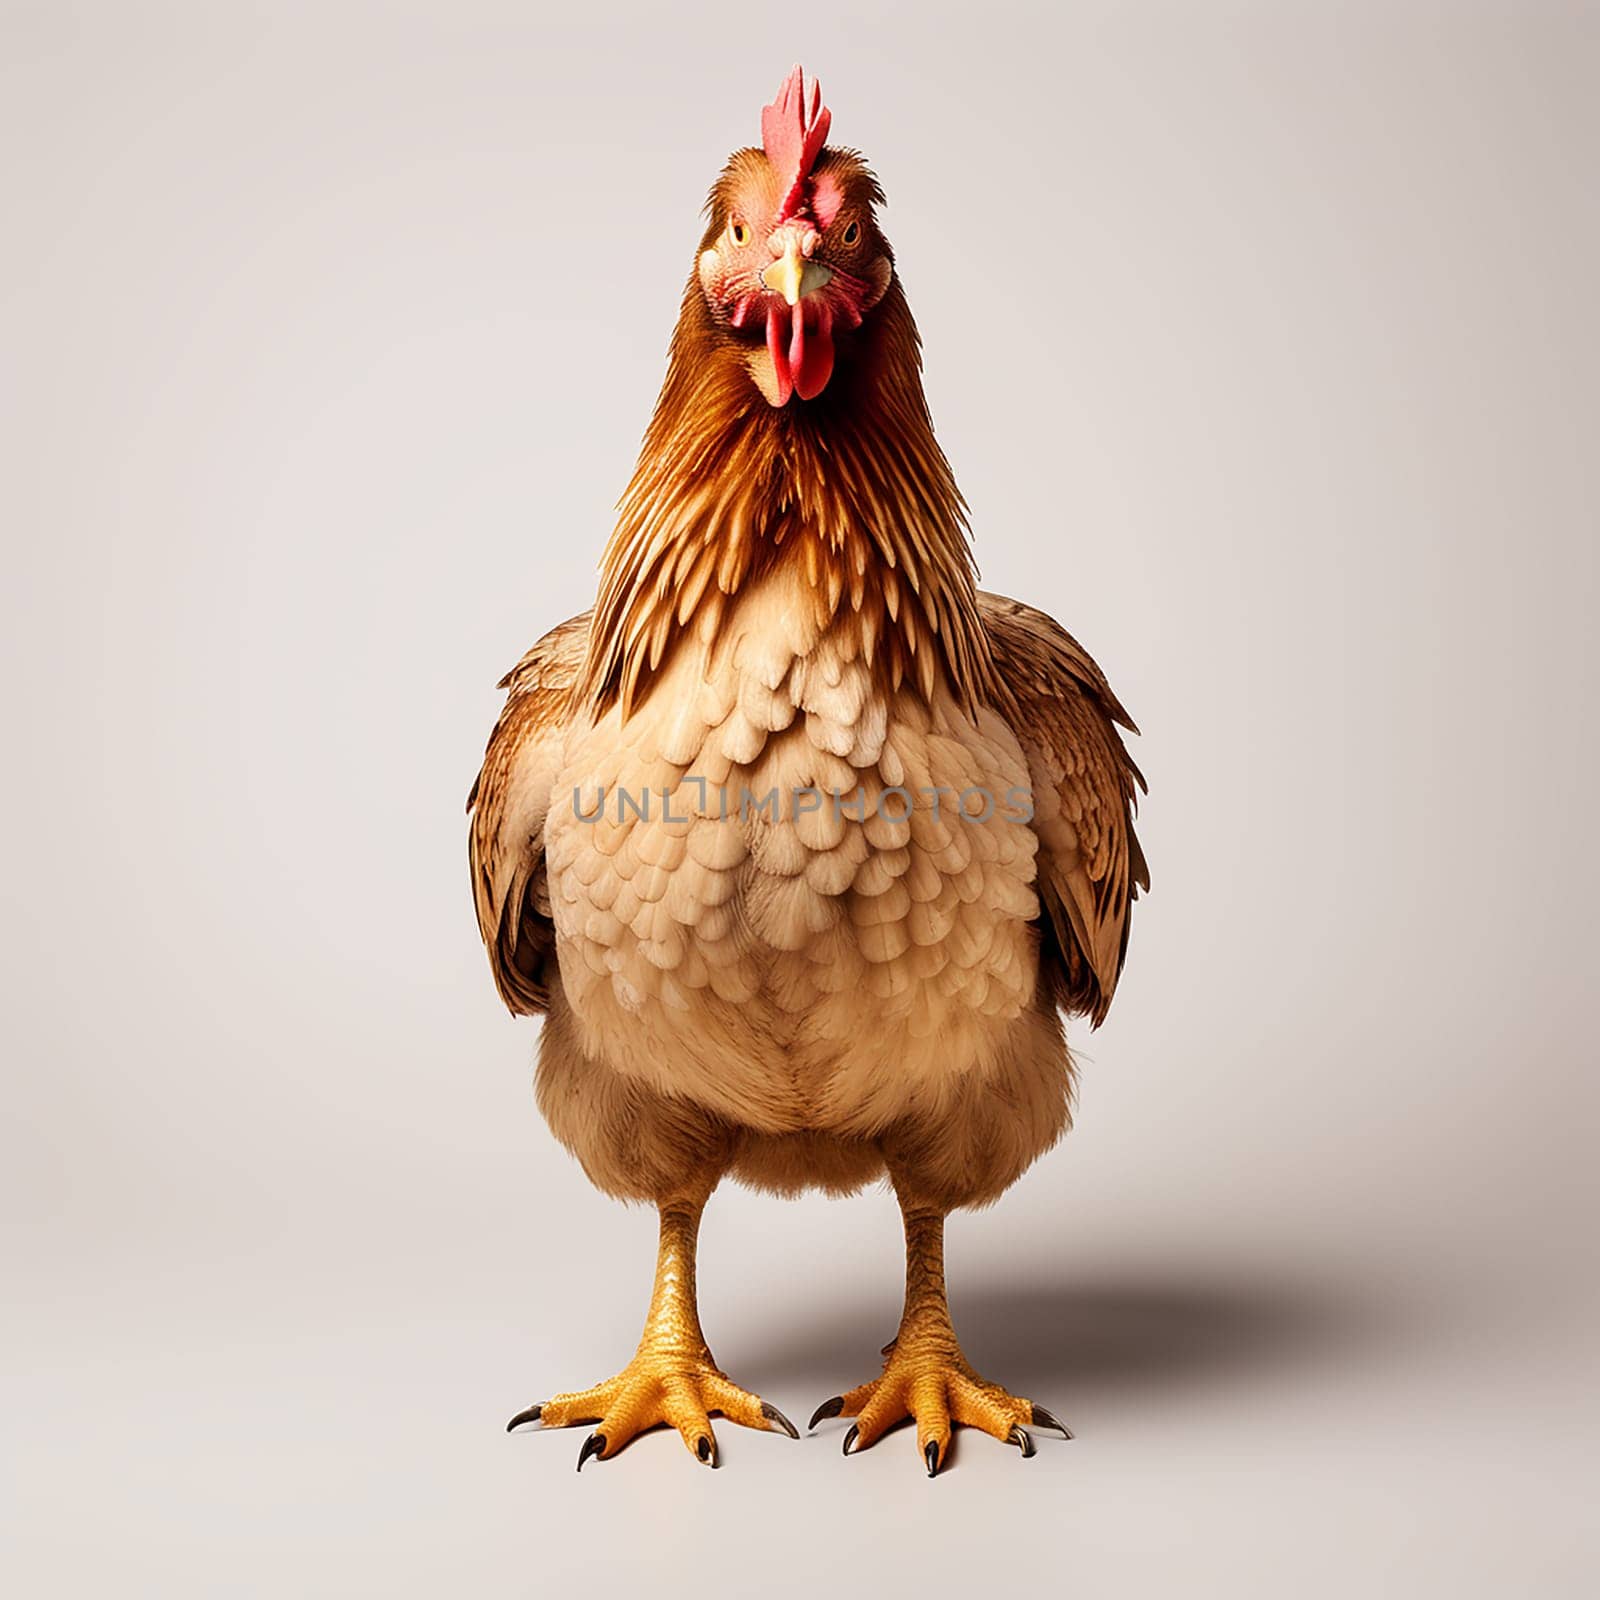 Full Body of Brown Chicken Standing Isolated on White Background - Farm Animals and Livestock